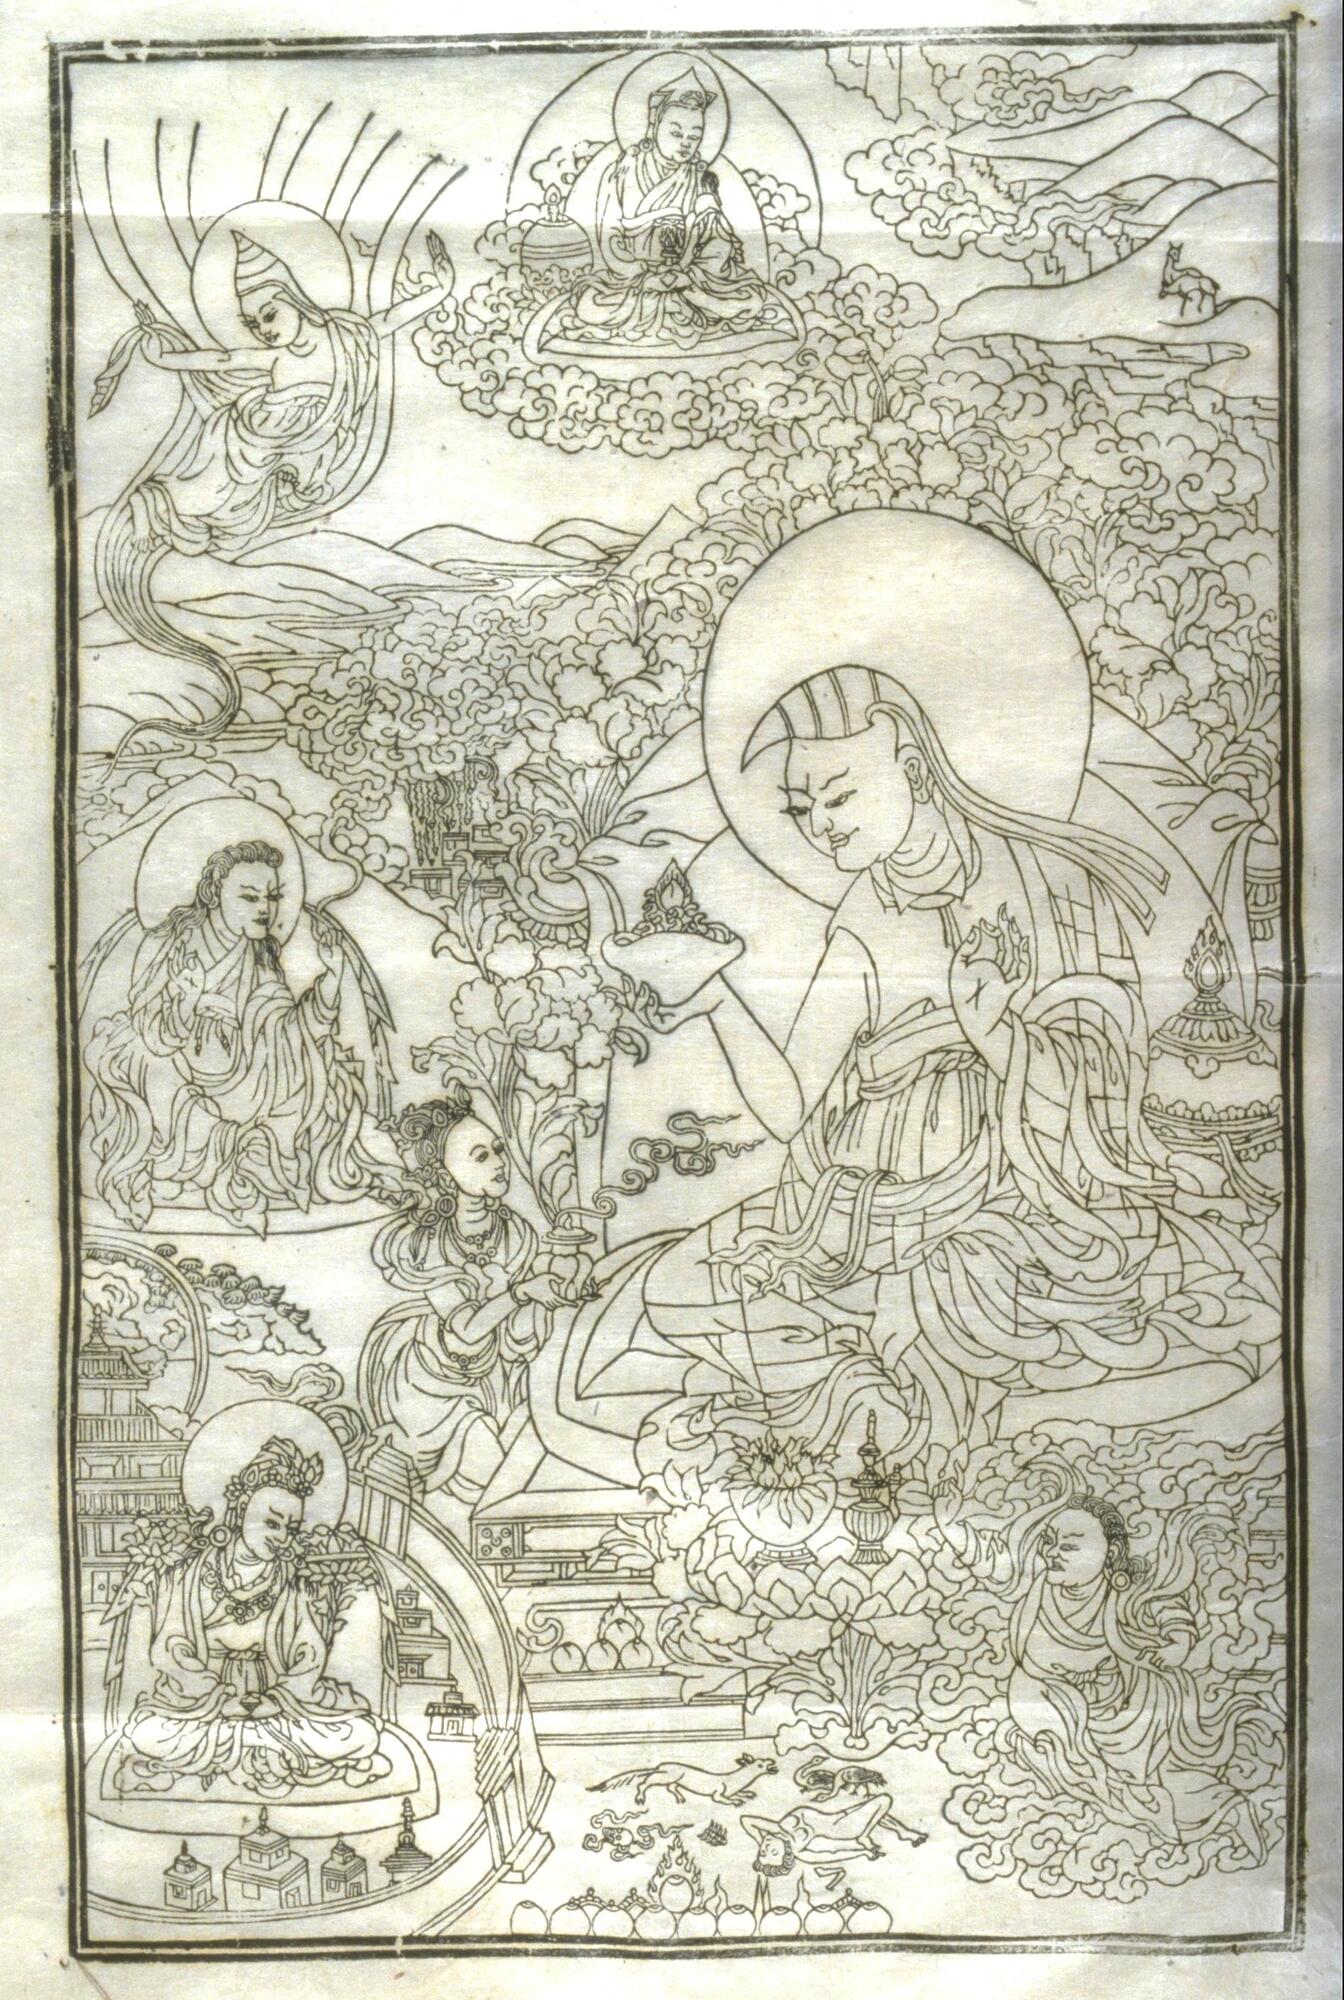 A woodblock print on paper; the block was quite worn, resulting in broken or smudged lines.